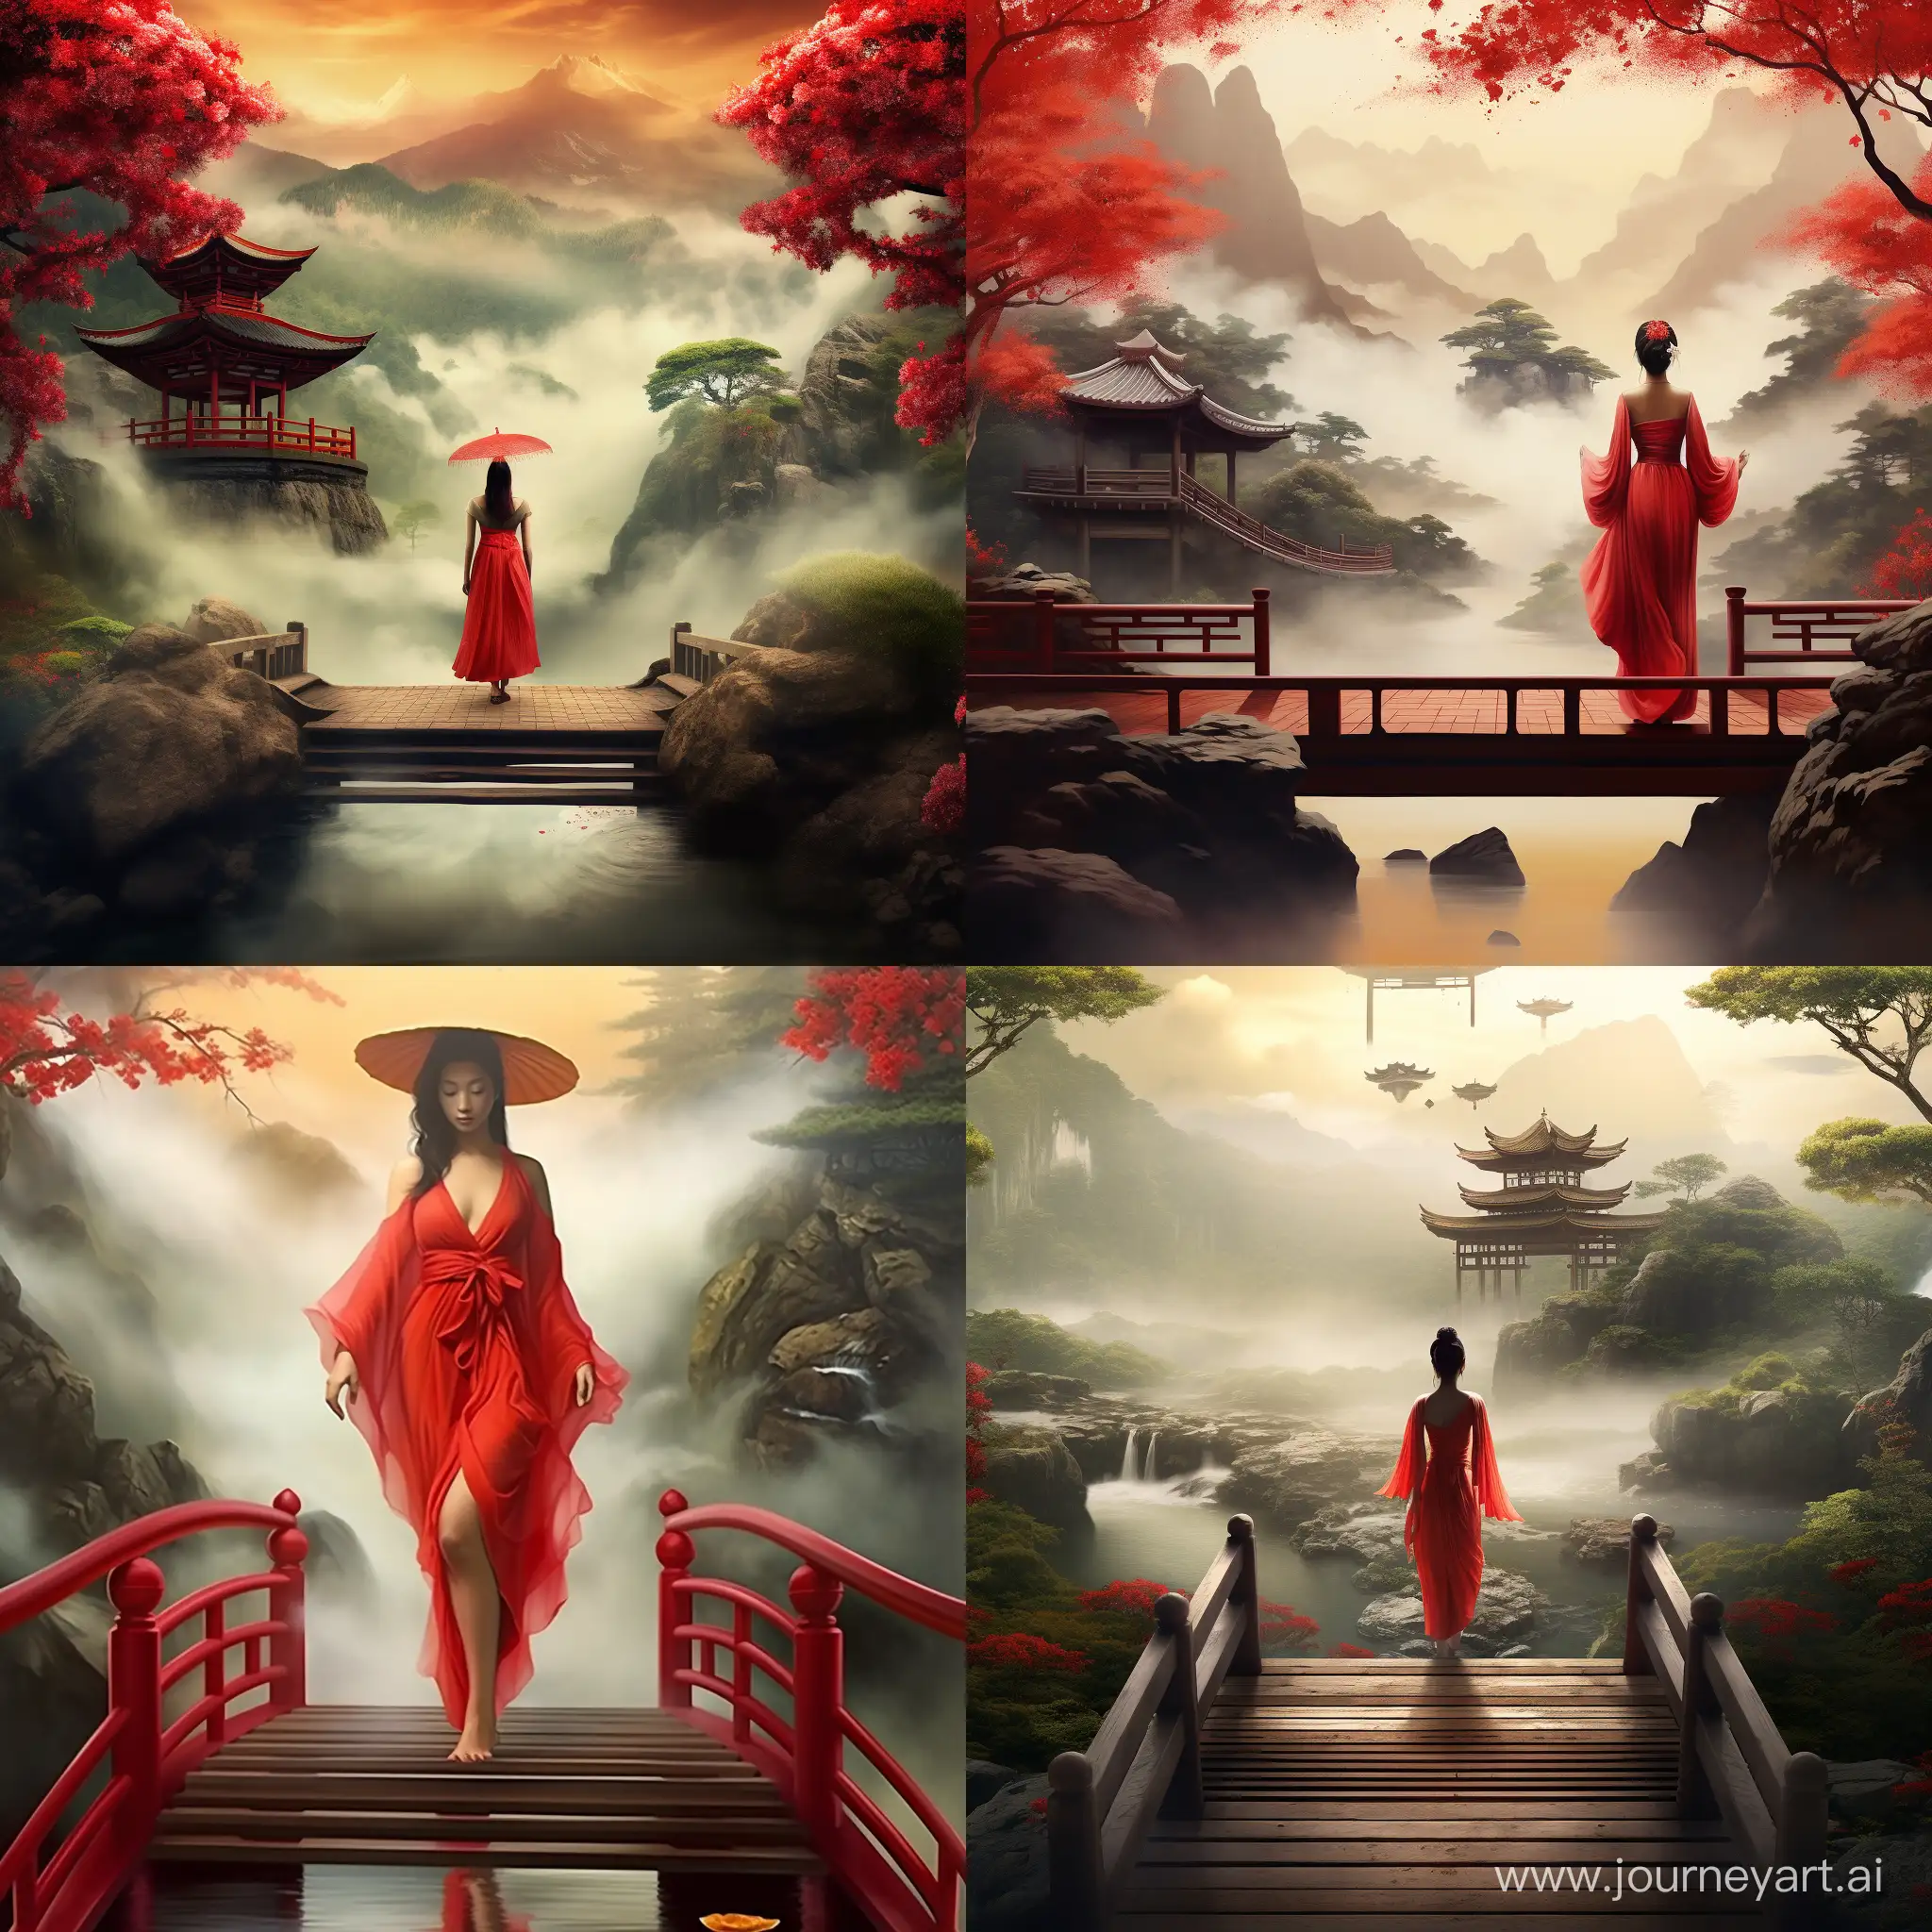 Japanese geisha in red dress wearing Japanese shoes with yellow umbrella standing on red wooden arch bridge over water in garden with Buddhist temple and  mist on top of the mountain  in background